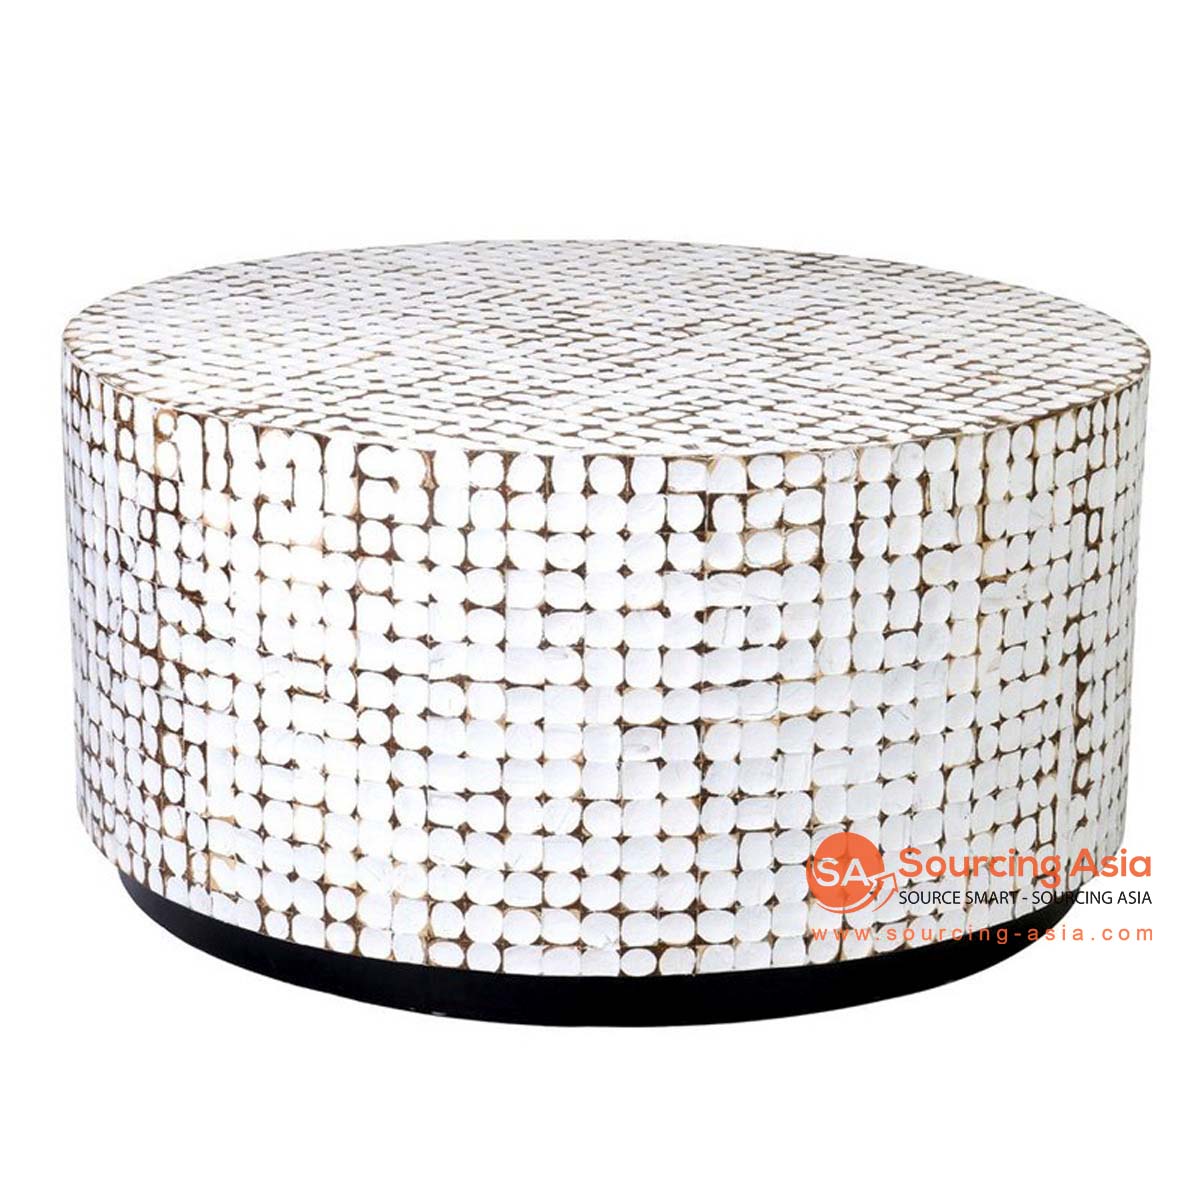 SHL495 WHITE WASH COCONUT SHELL ROUND COFFEE TABLE